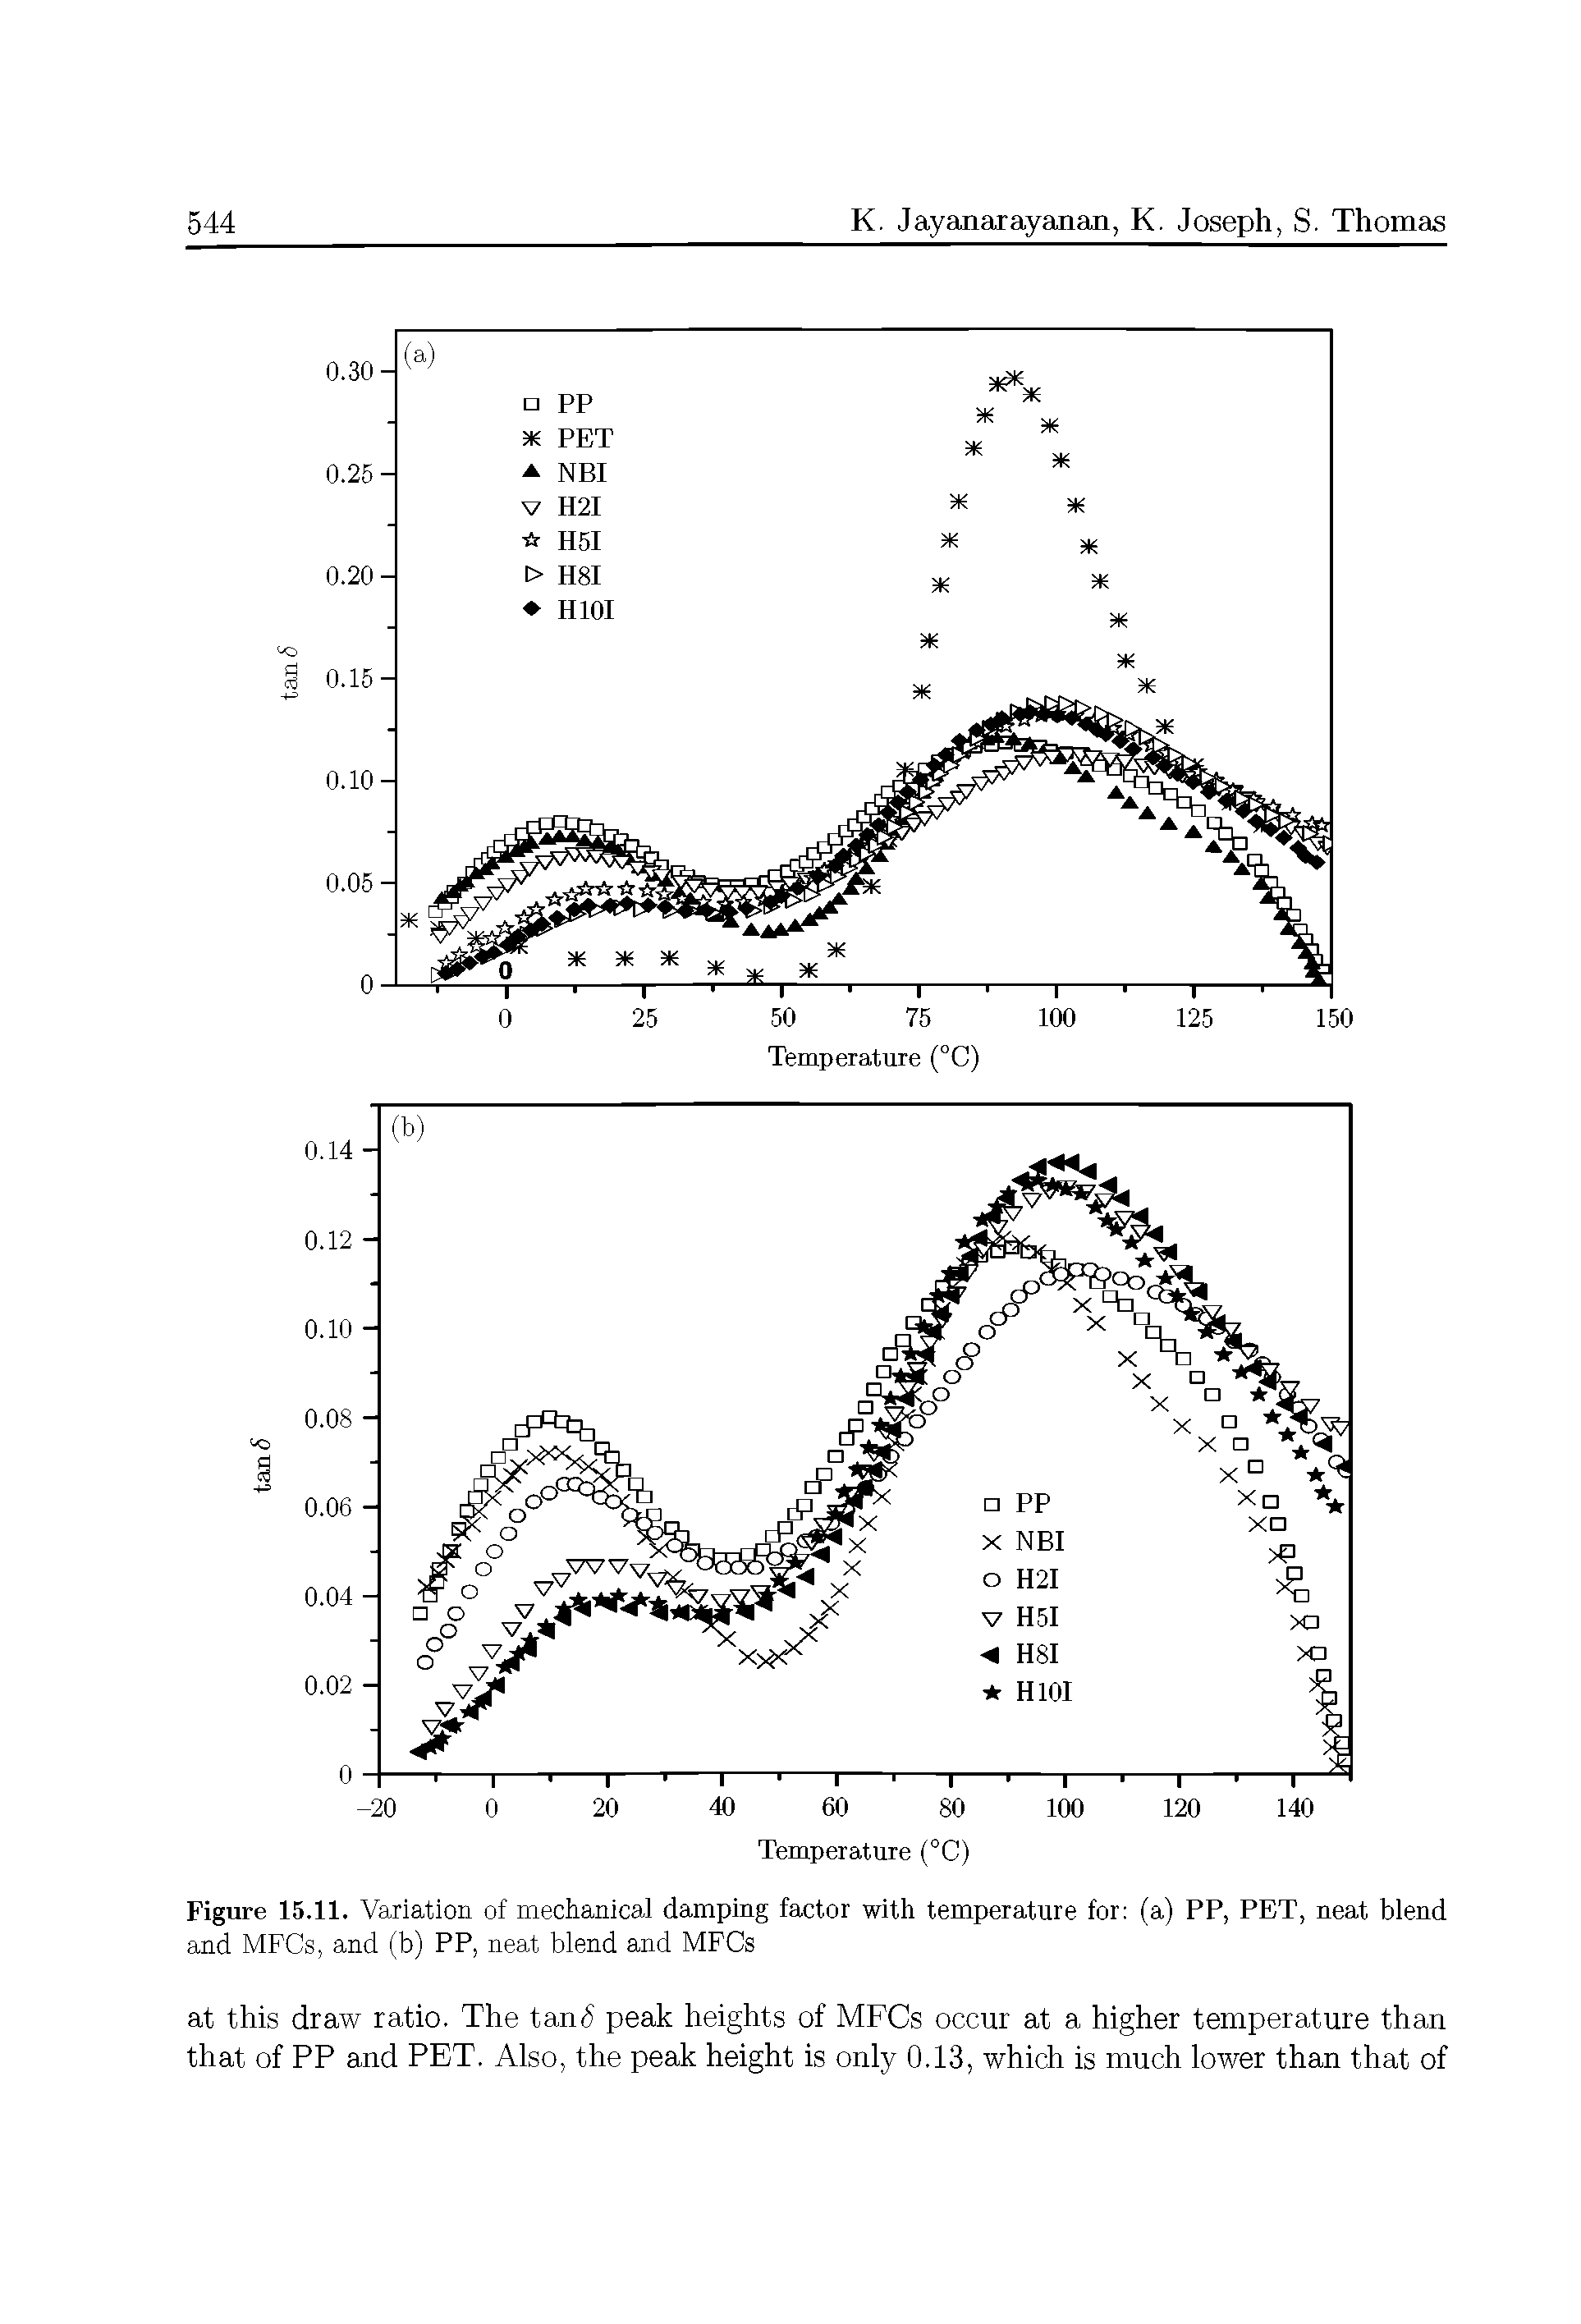 Figure 15.11. Variation of mechanical damping factor with temperature for (a) PP, PET, neat blend and MFCs, and (b) PP, neat blend and MFCs...